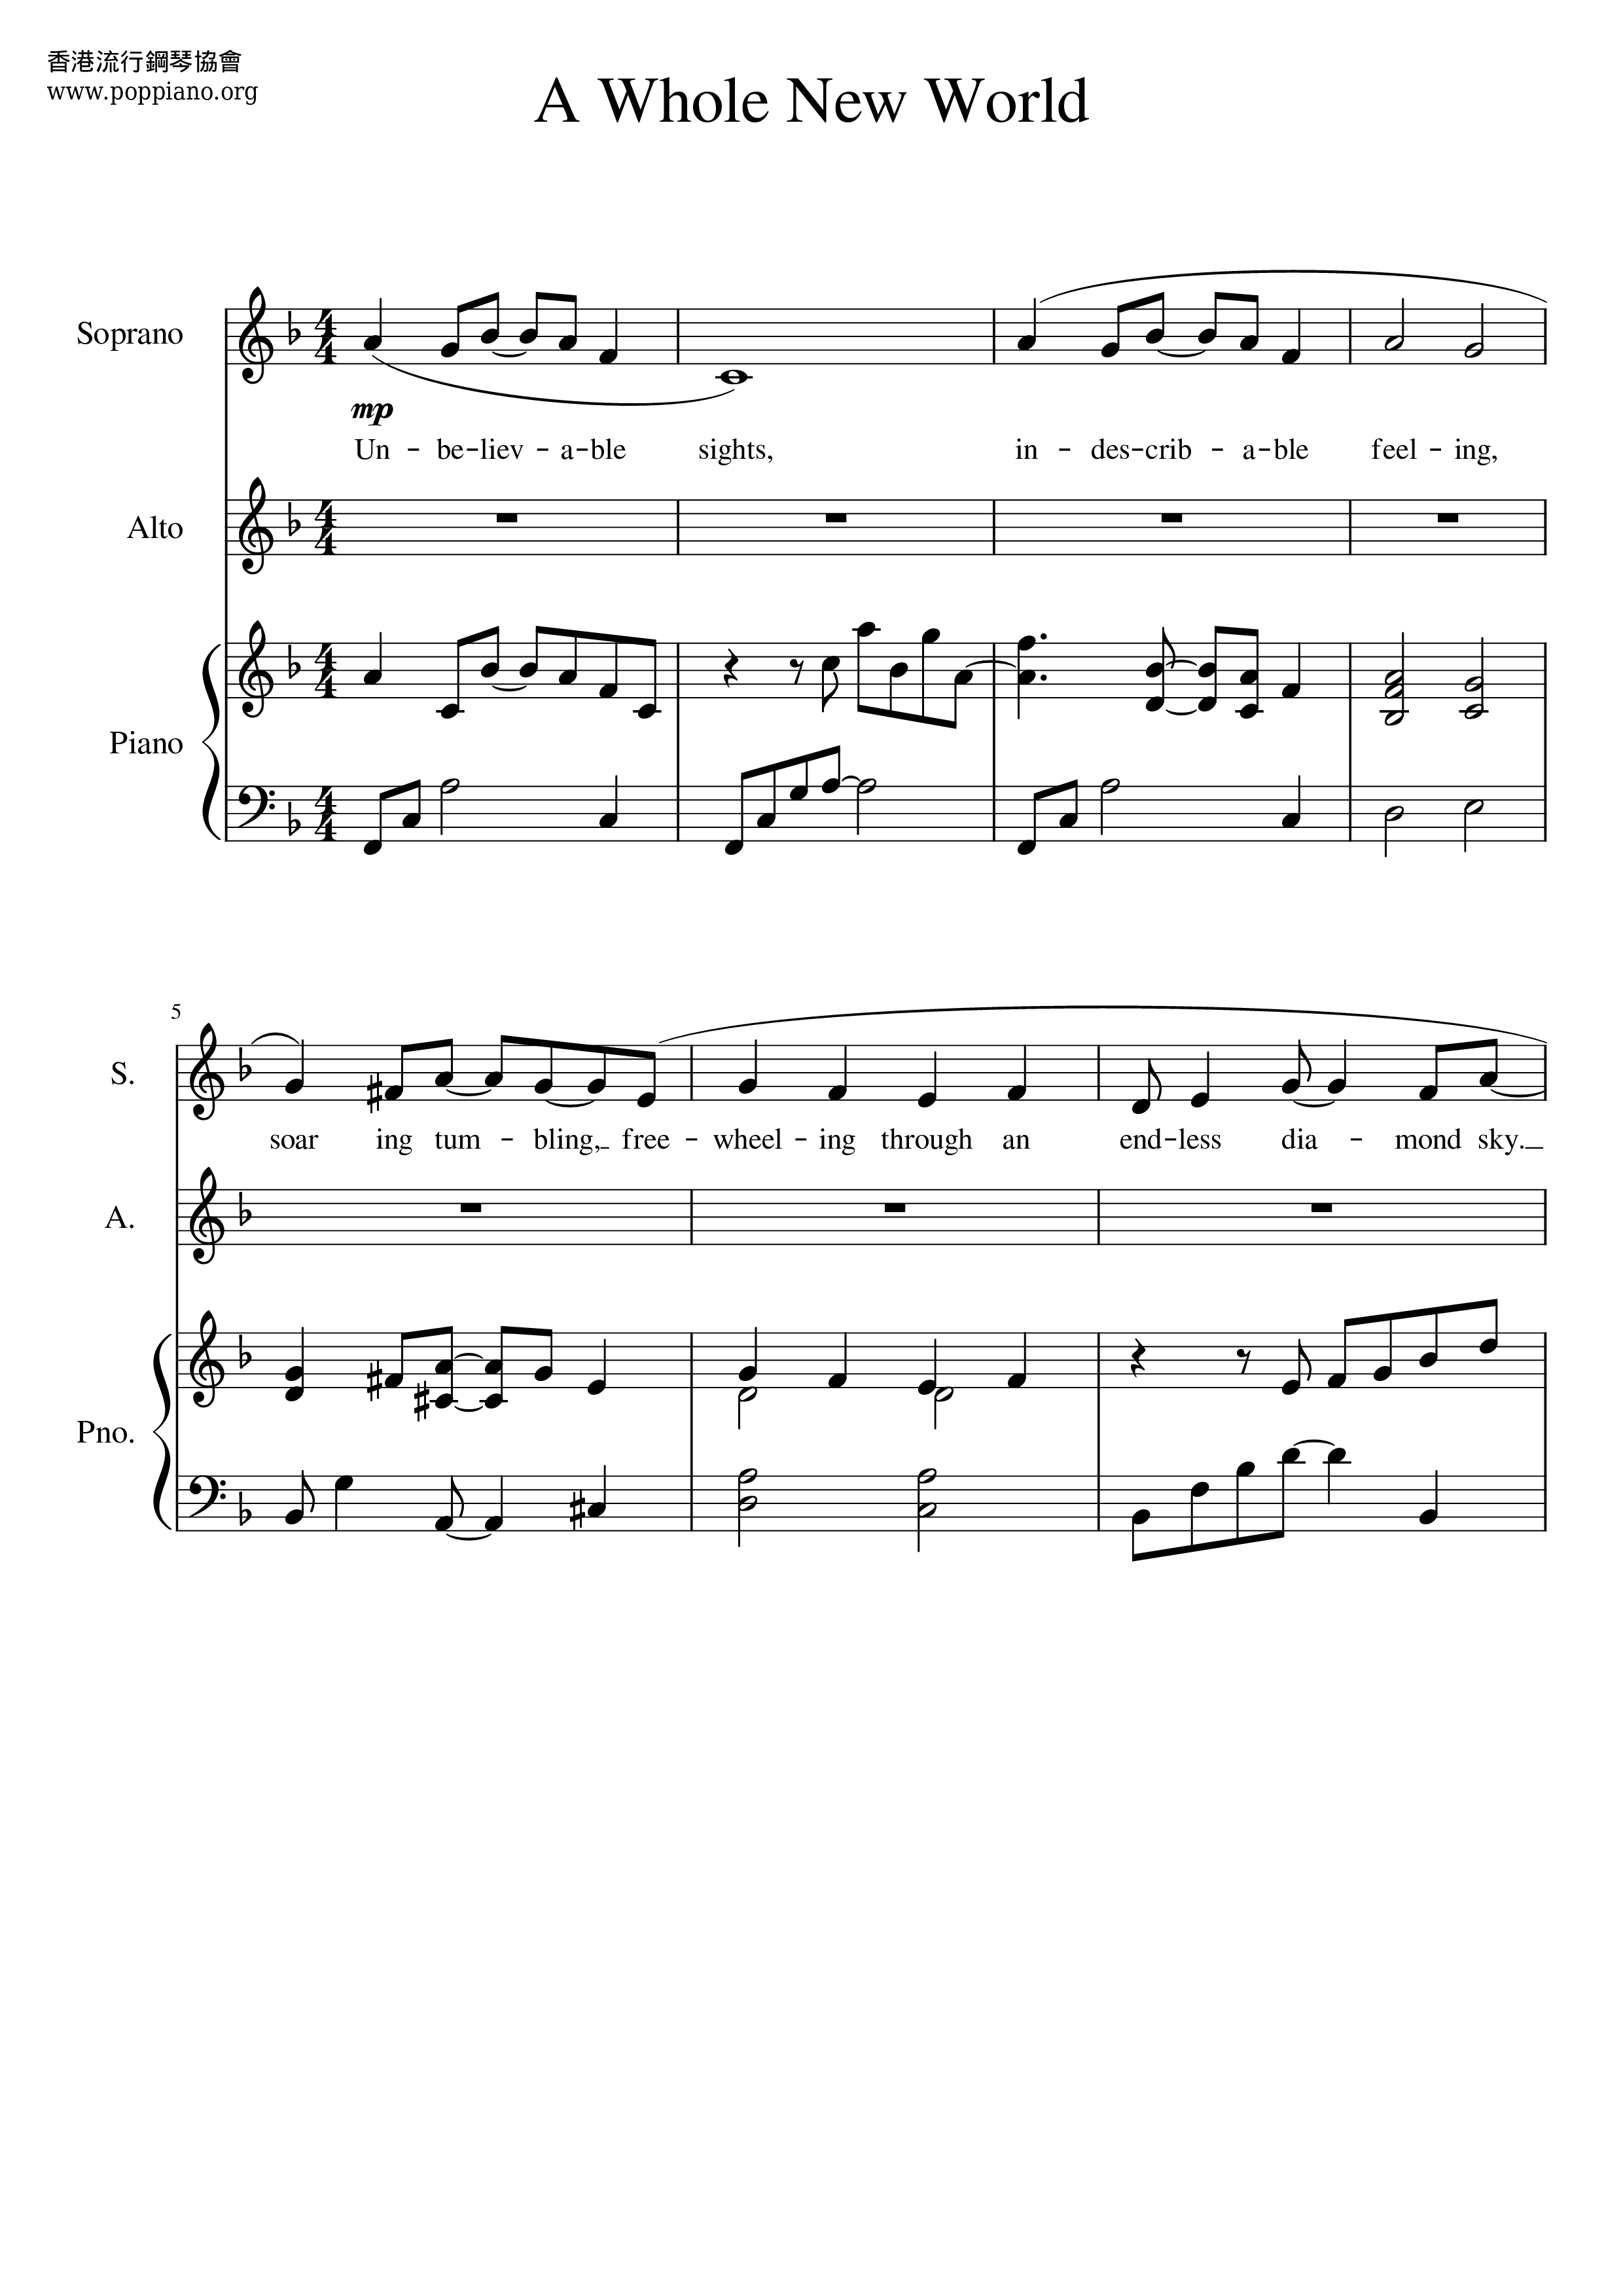 A Whole New World (End Title) - From Aladdin Score